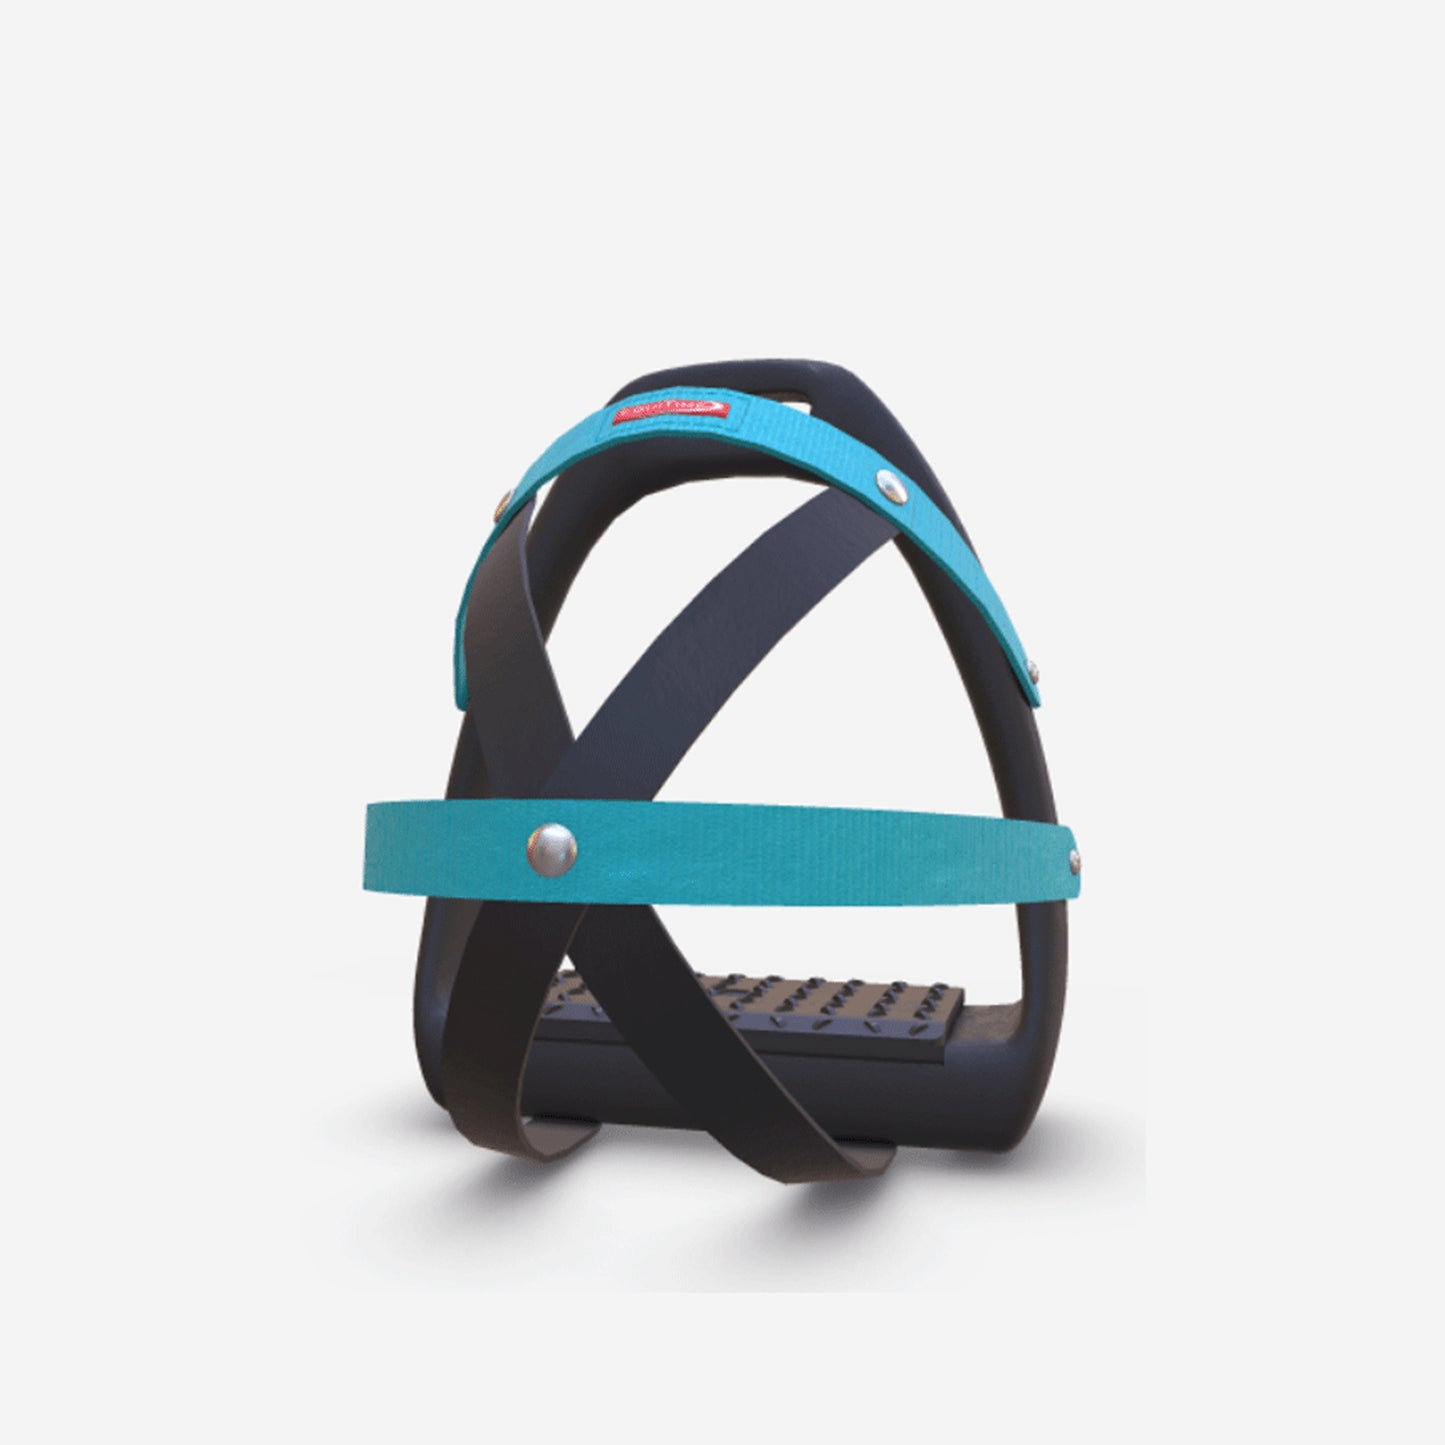 Equitime Endurance Stirrups with Biothane Cage